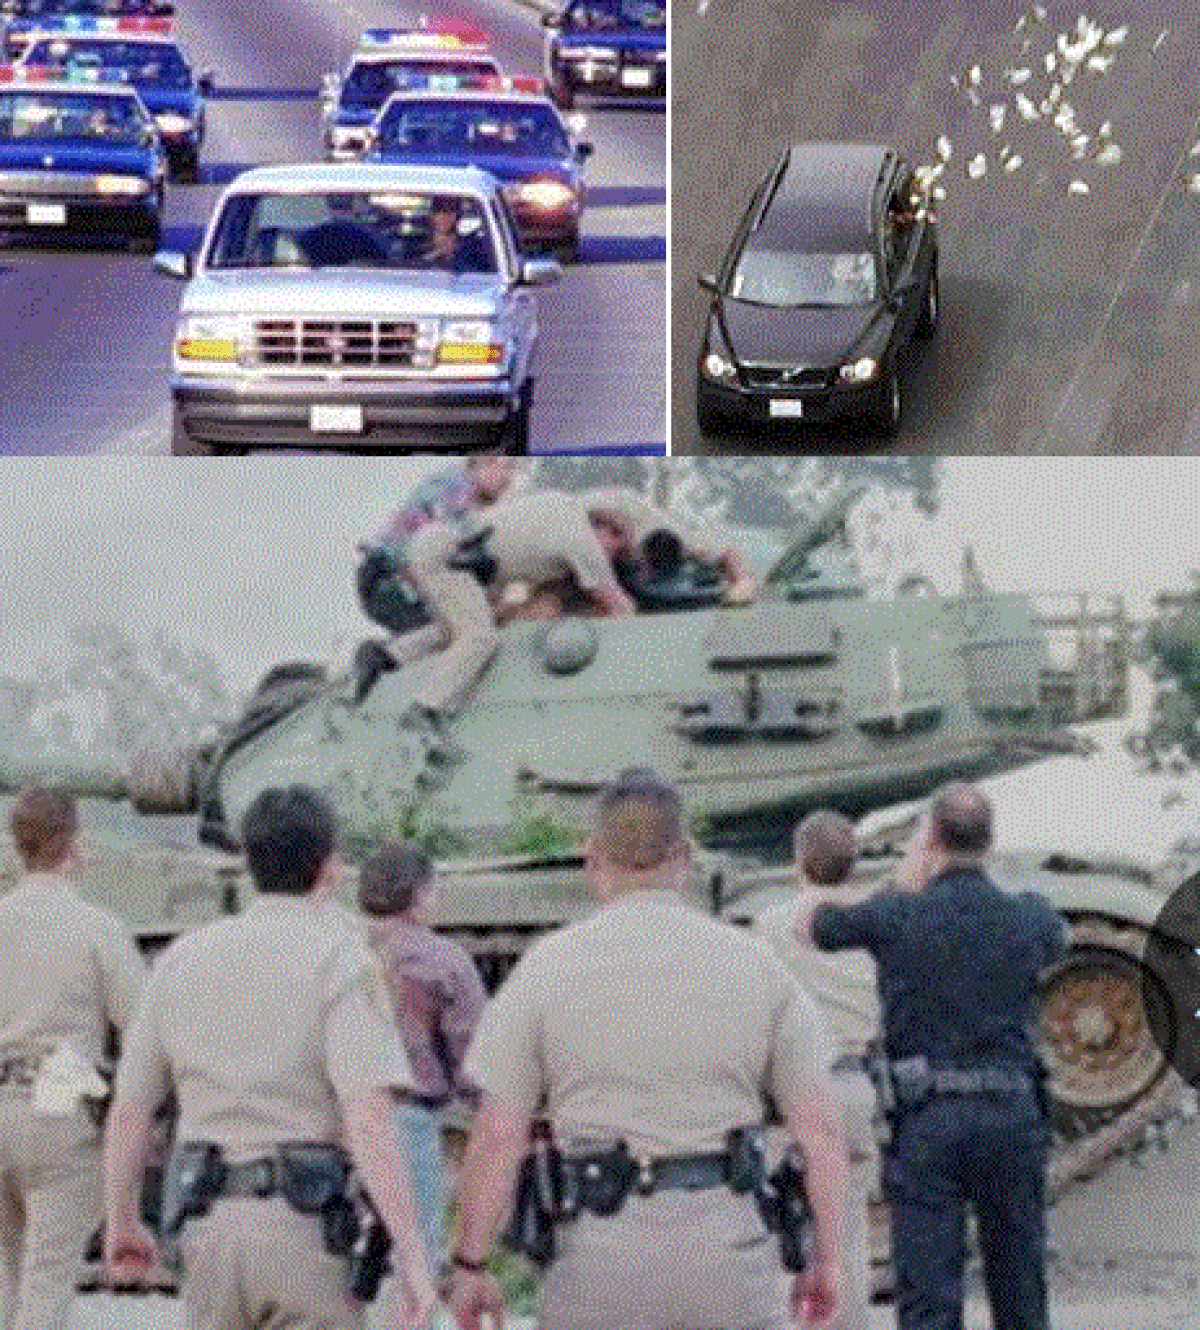 A montage of some of Southern California's wildest car chases, including the one involving O.J. Simpson; one in which robber threw money of the car and a chase and ramage involving a tank in San Diego.